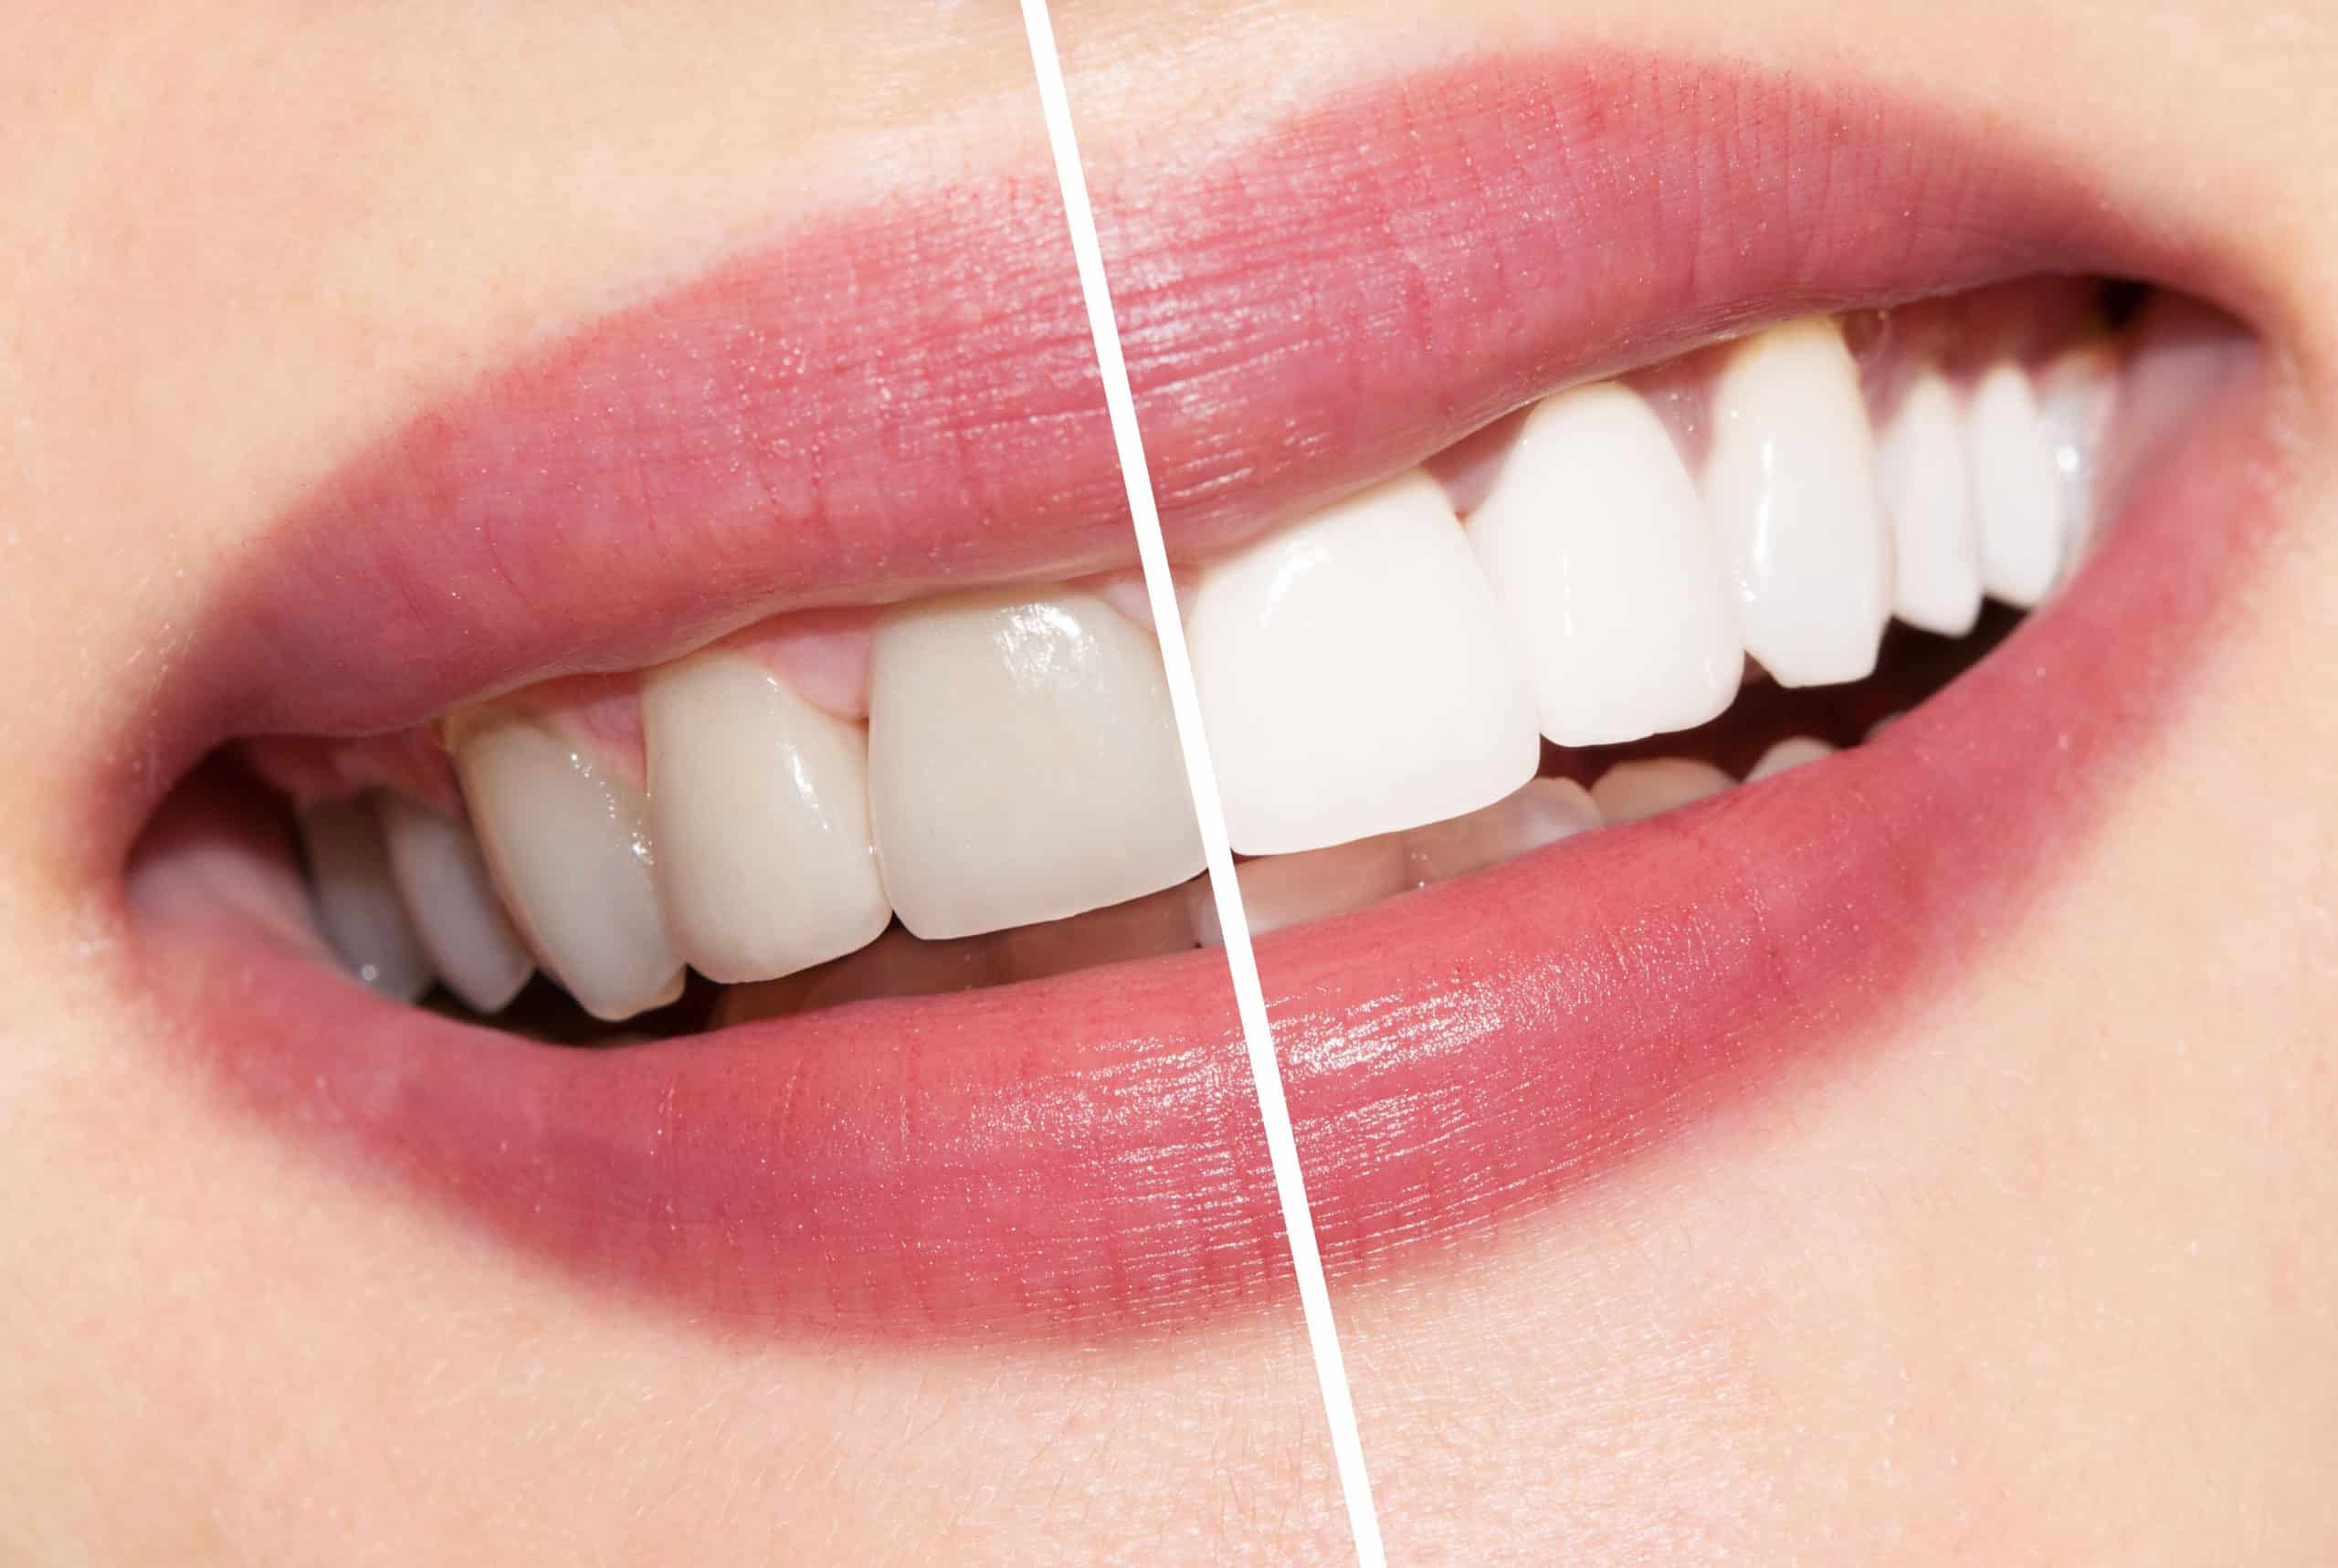 Some Interesting Facts about Teeth Whitening